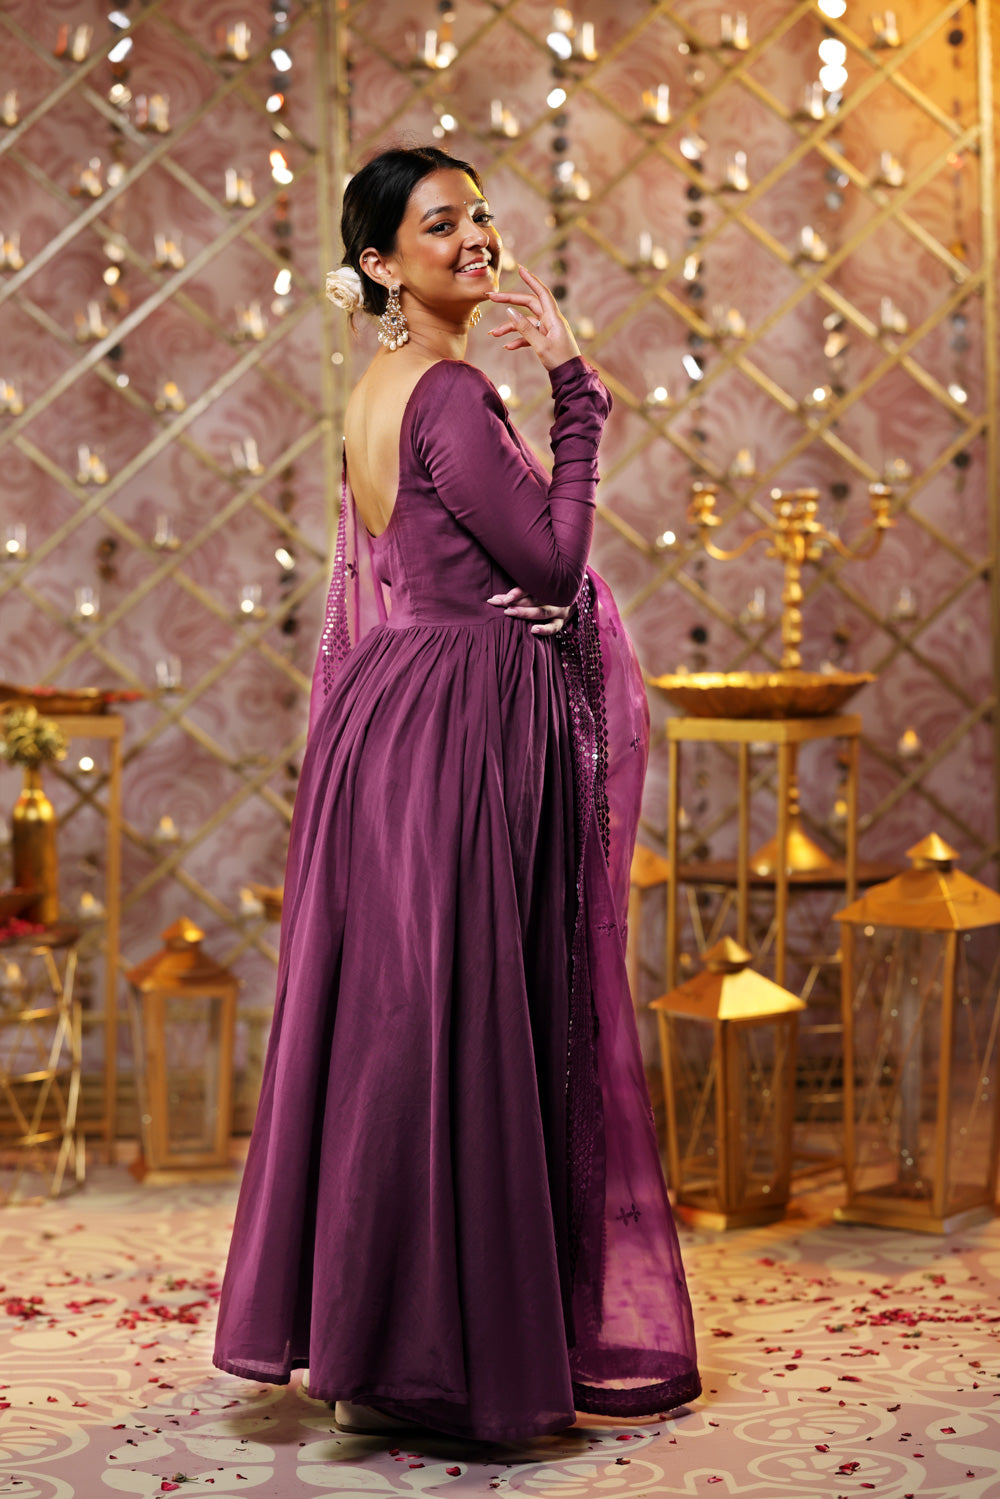 Karisma Kapoor is setting the festive fashion bar high in a purple anarkali  suit | Times of India